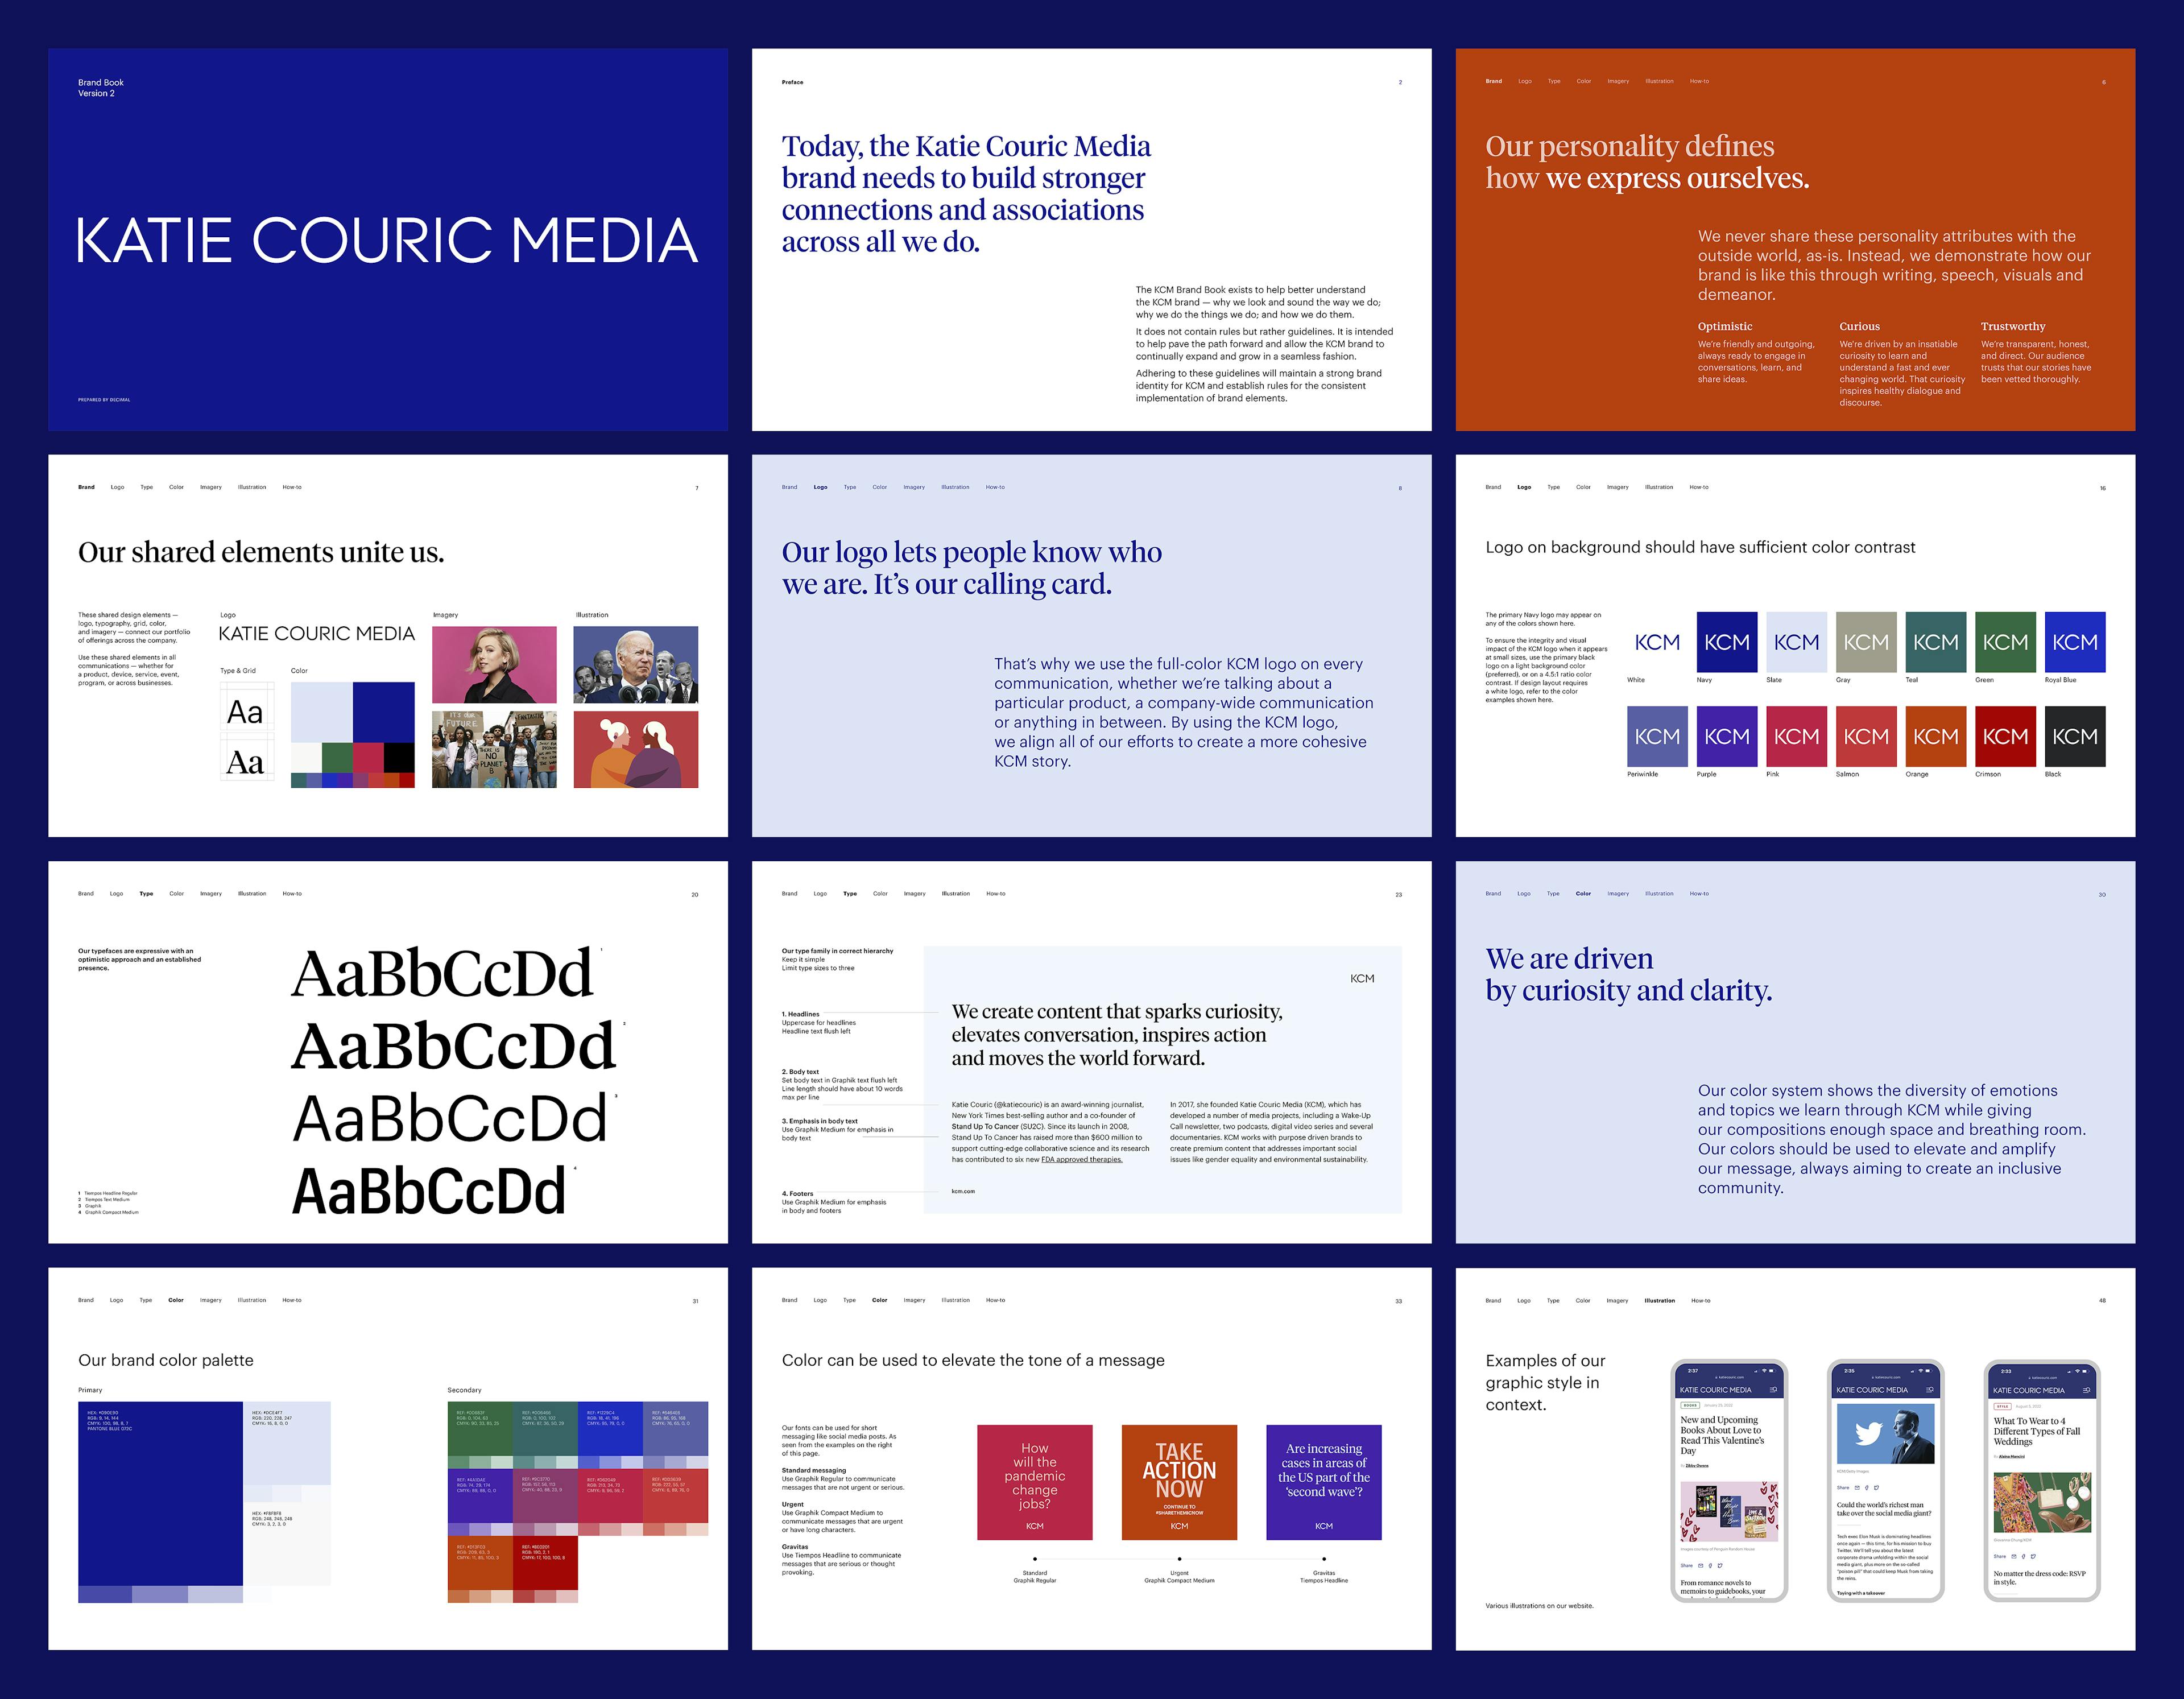 Collage of the brand guidelines for the KCM brand.